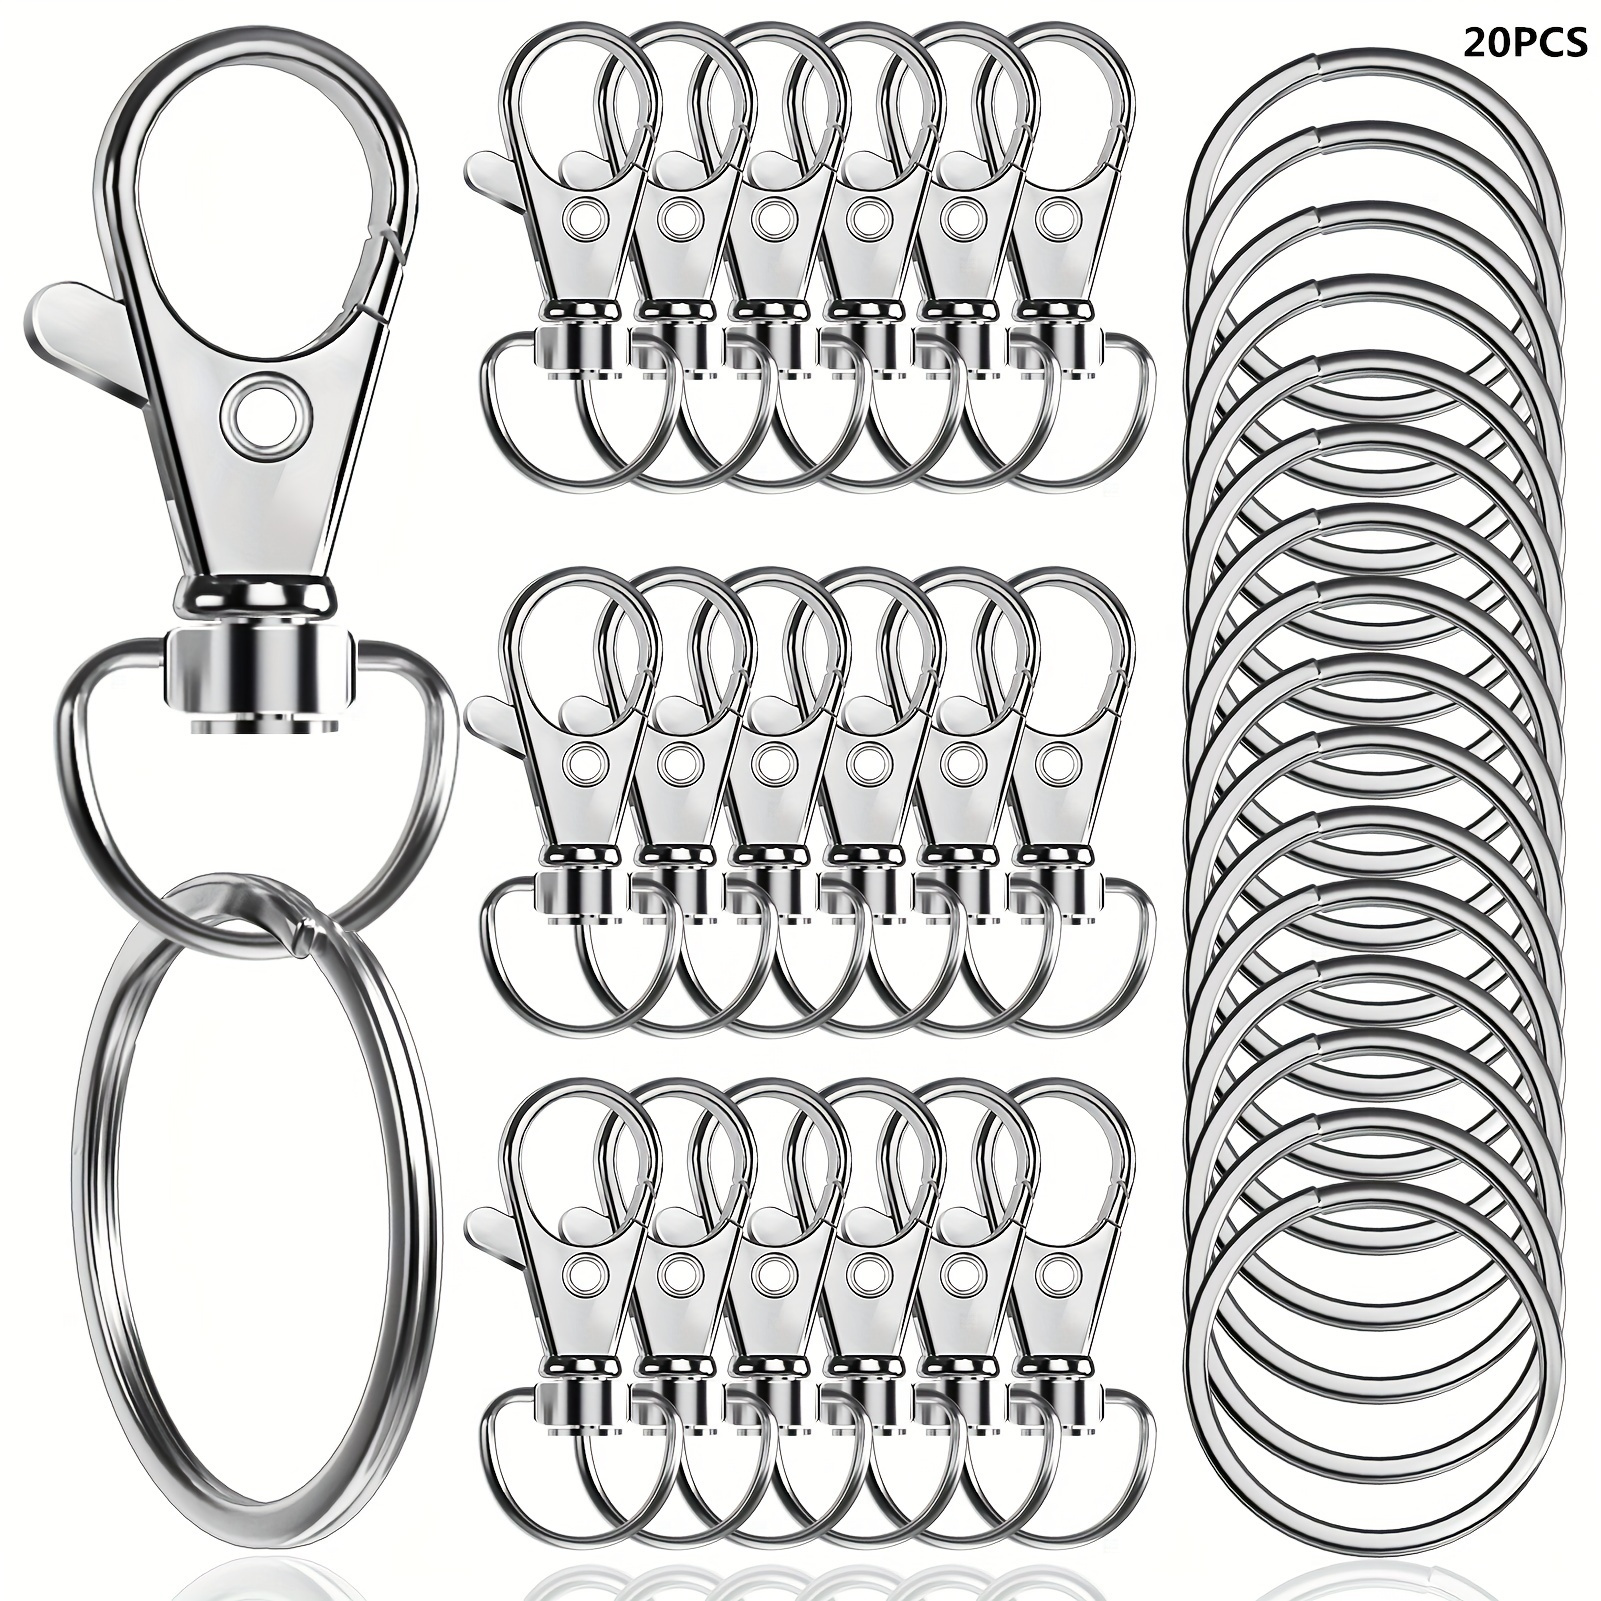 1.57inch M4 Small Stainless Steel Spring Snap Hook Carabiner Clips Kits  20/40pcs